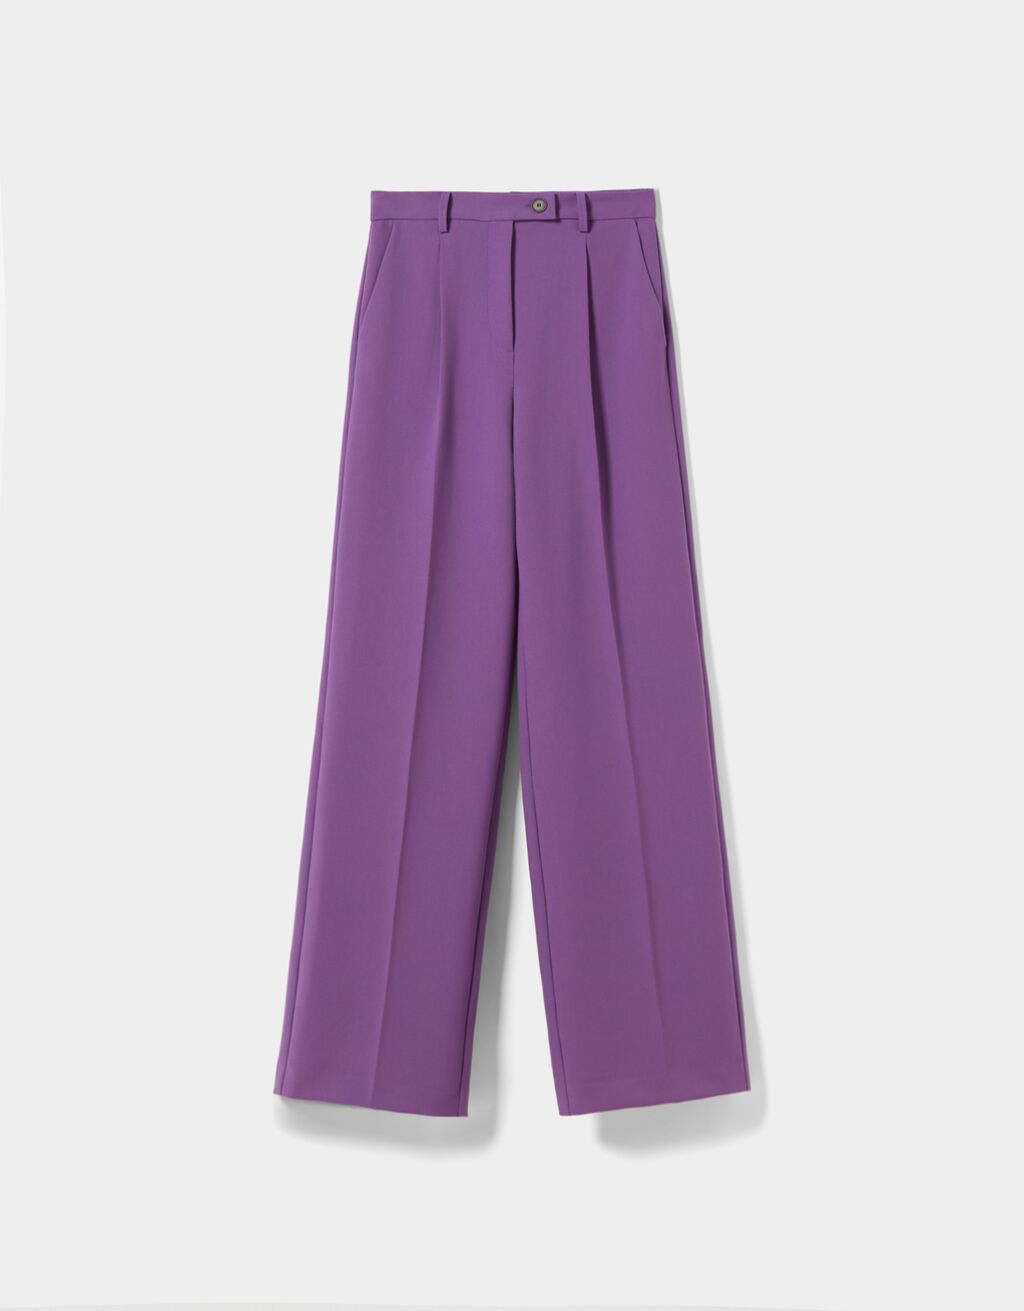 Straight-fit tailored trousers